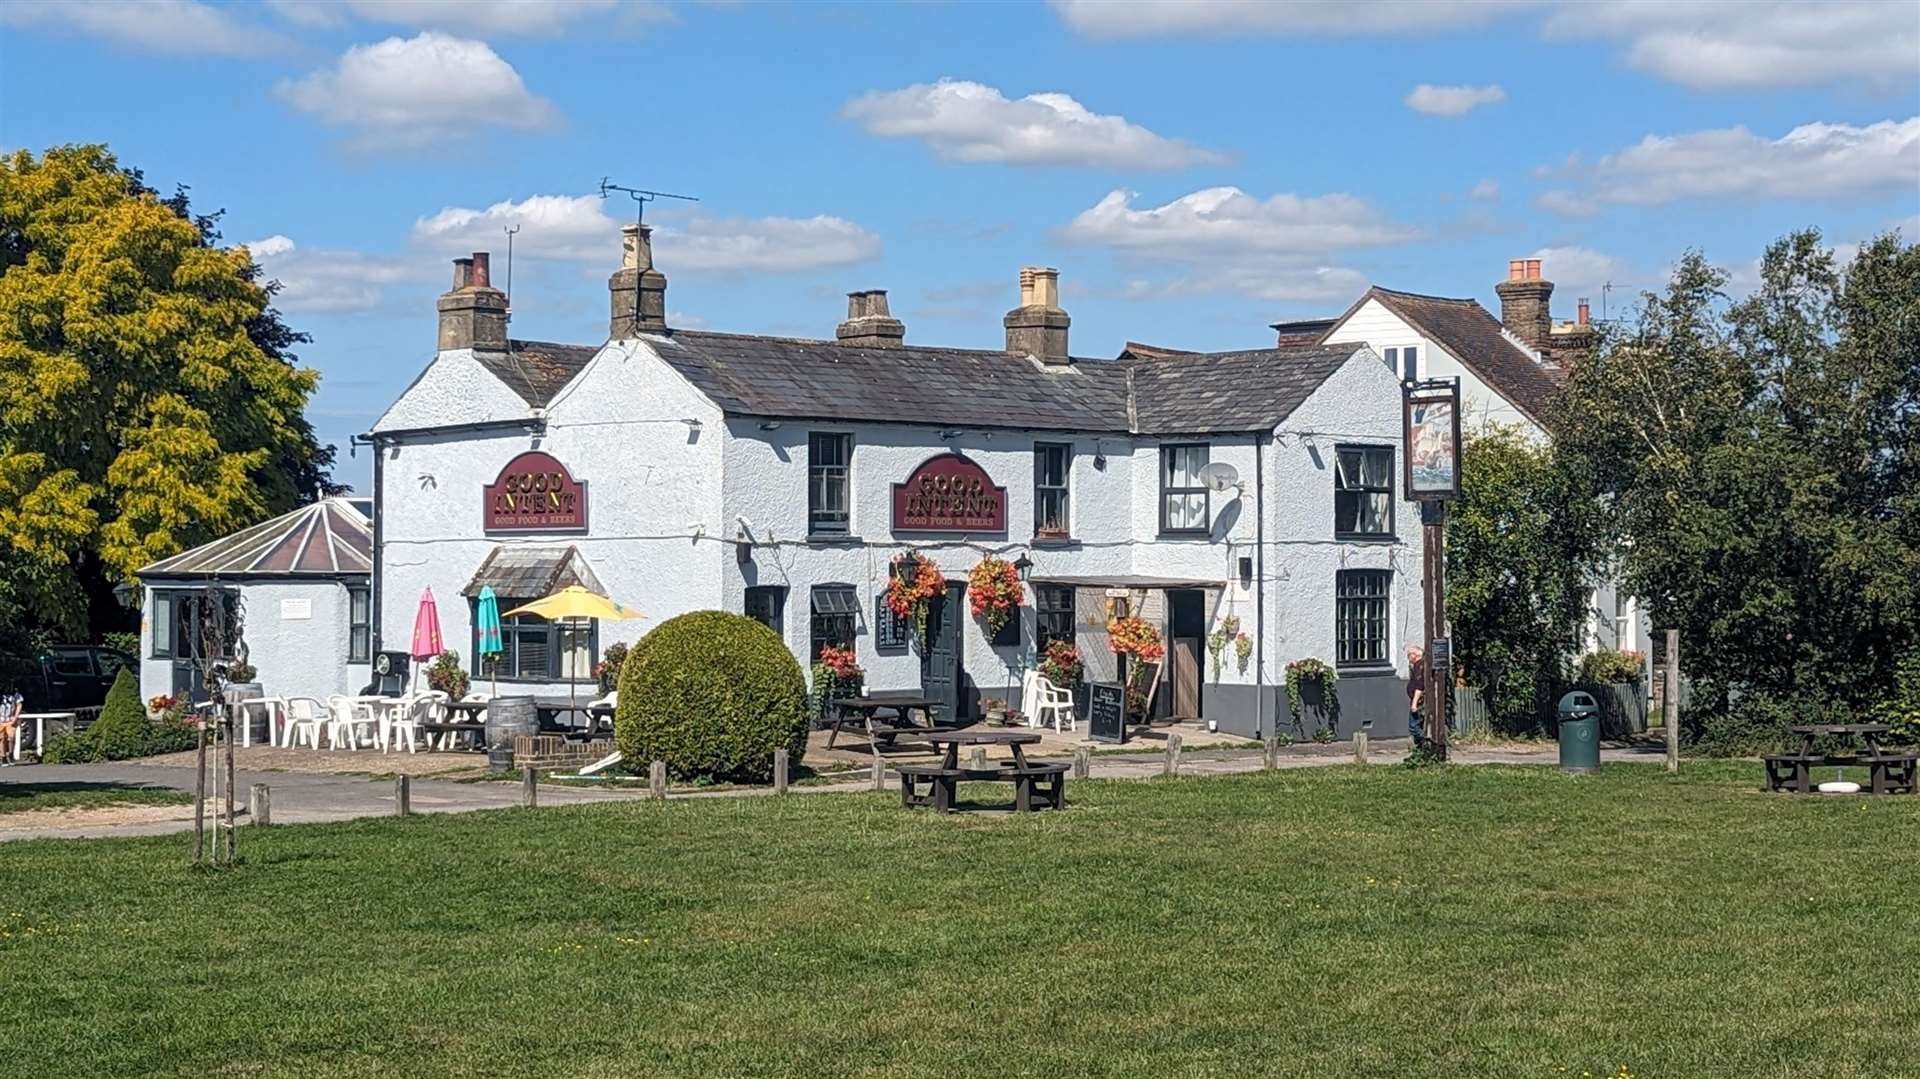 The Good Intent pub at West Farleigh